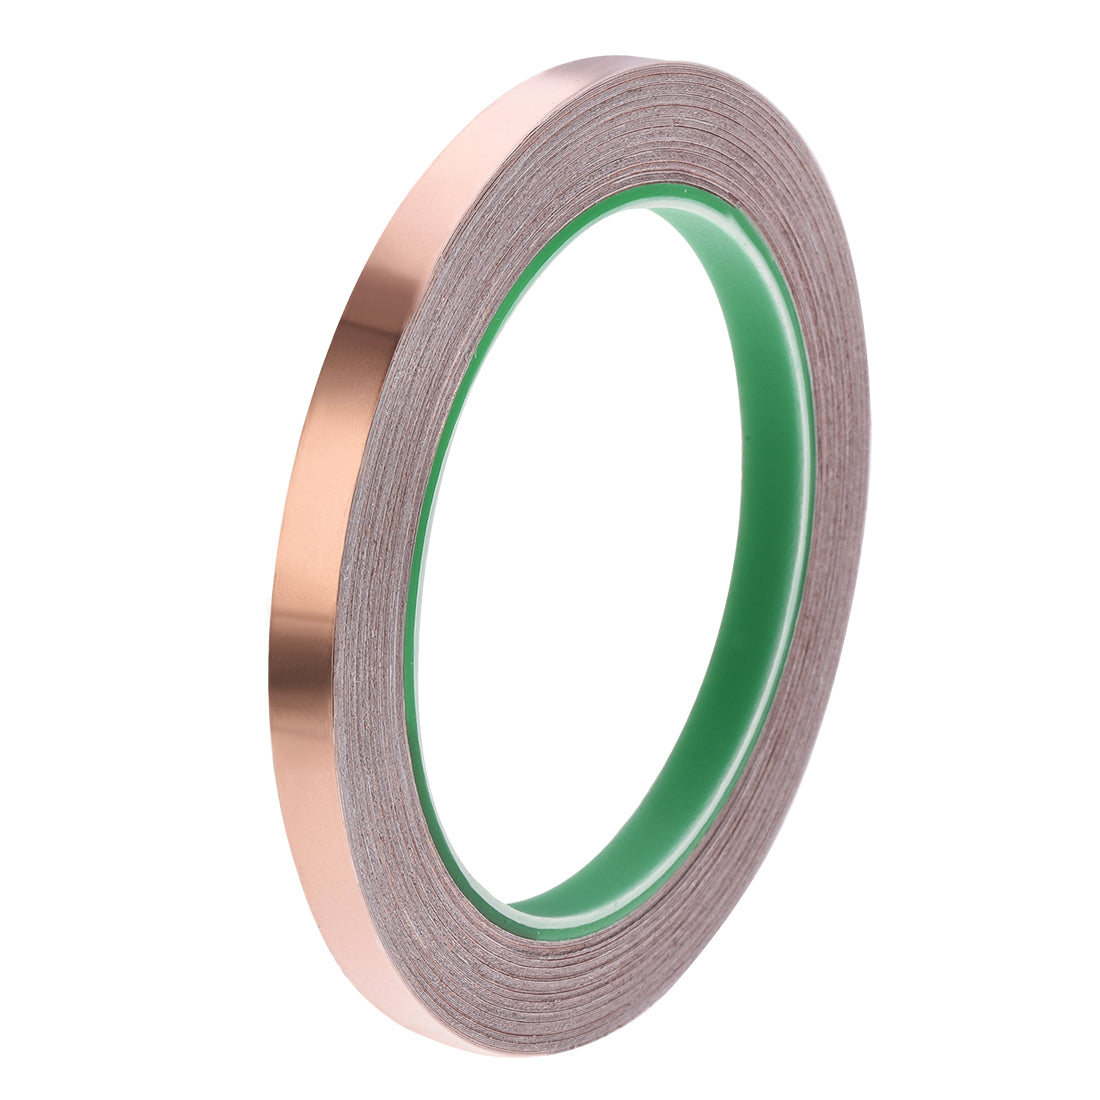 uxcell Uxcell Double Sided Conductive Tape Copper Foil Tape 8mm x 20m for EMI Shielding